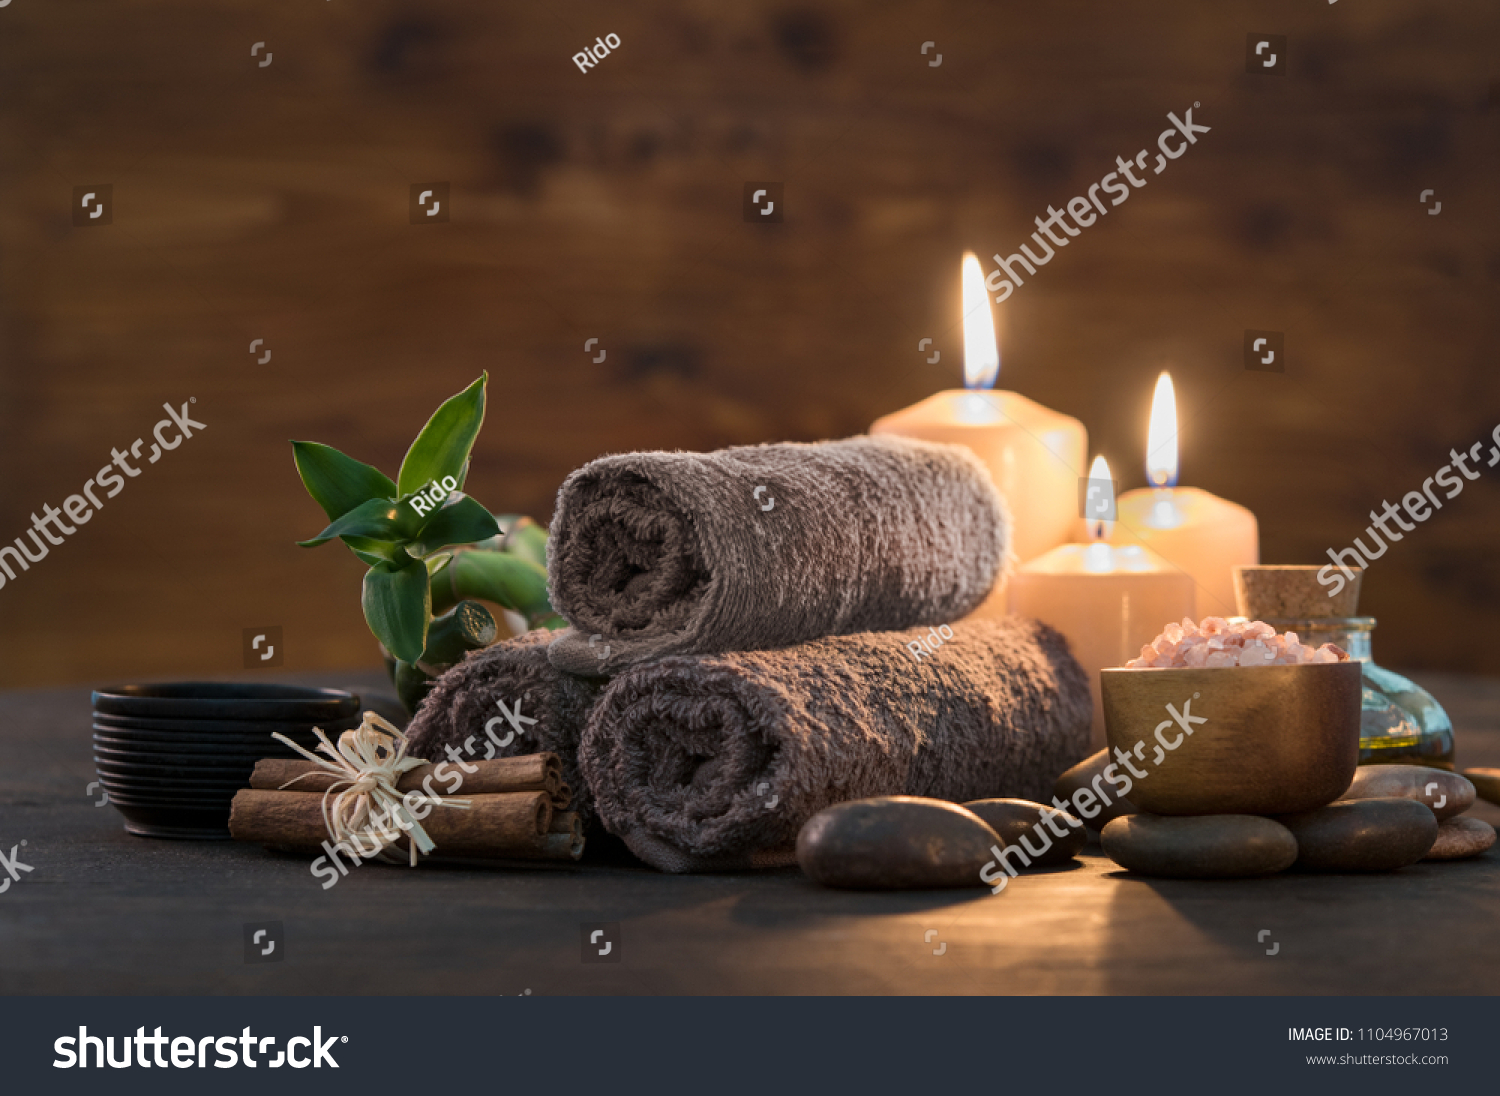 Brown towels with bamboo and candles for relax spa massage and body treatment. Composition with candles, spa stones and salt on wooden background. Spa and wellness setting ready for beauty treatment.  #1104967013